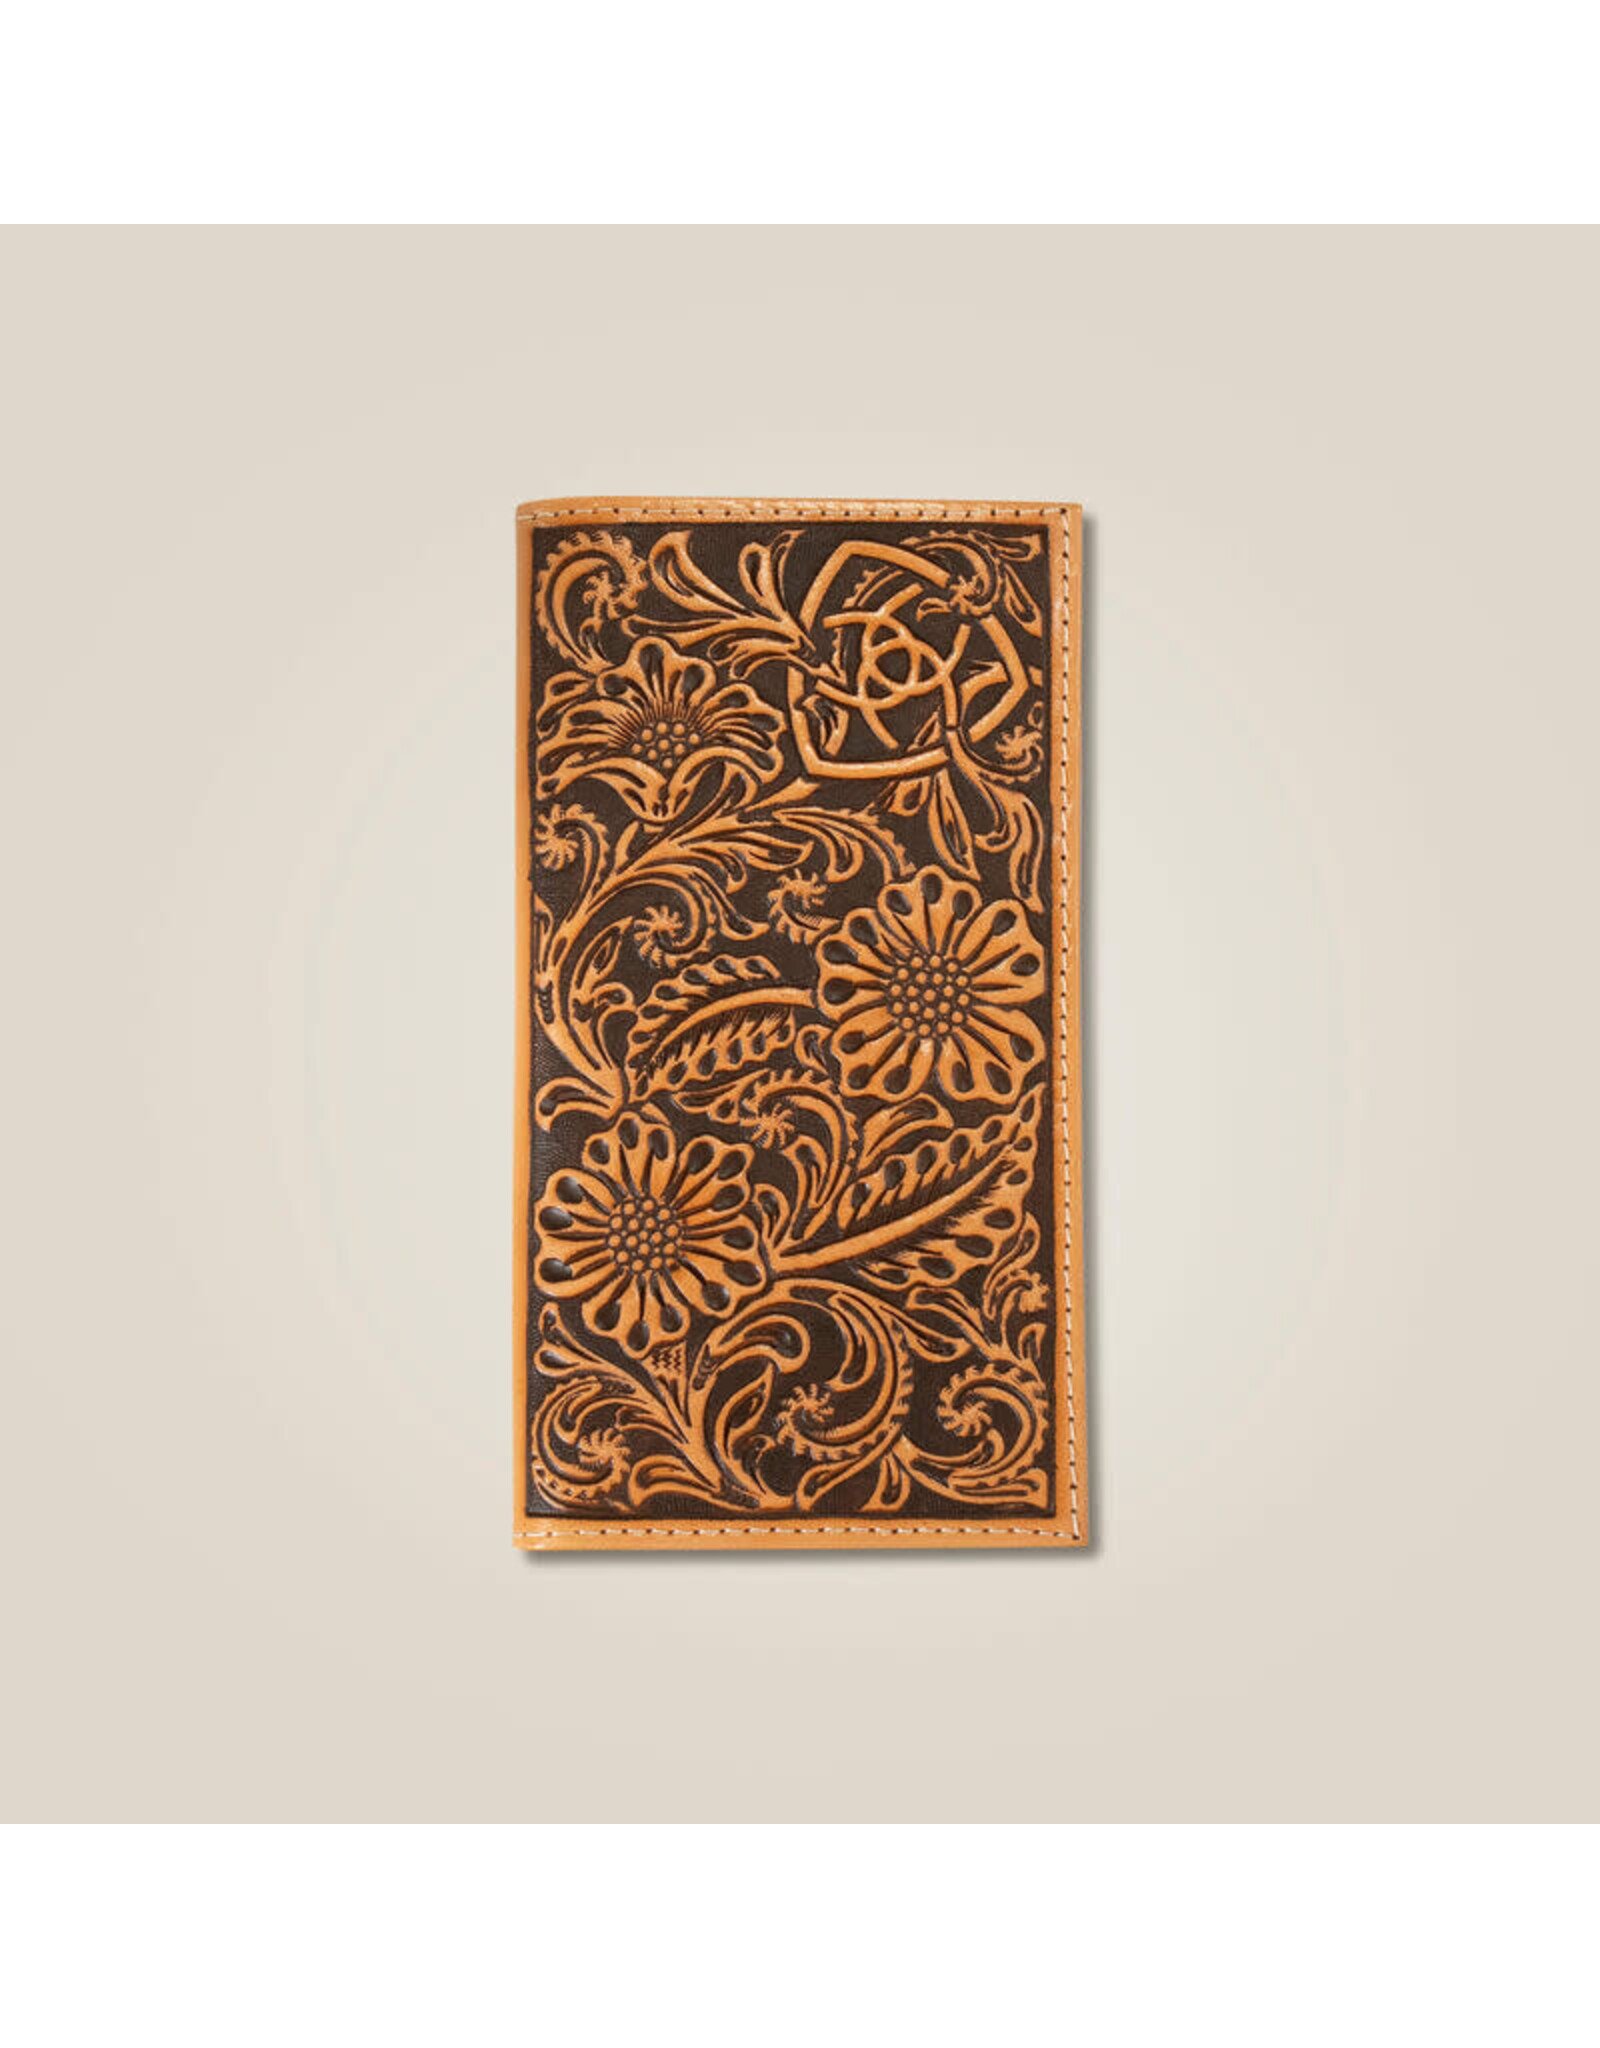 Ariat Floral Tooled Rodeo Wallet A3550908